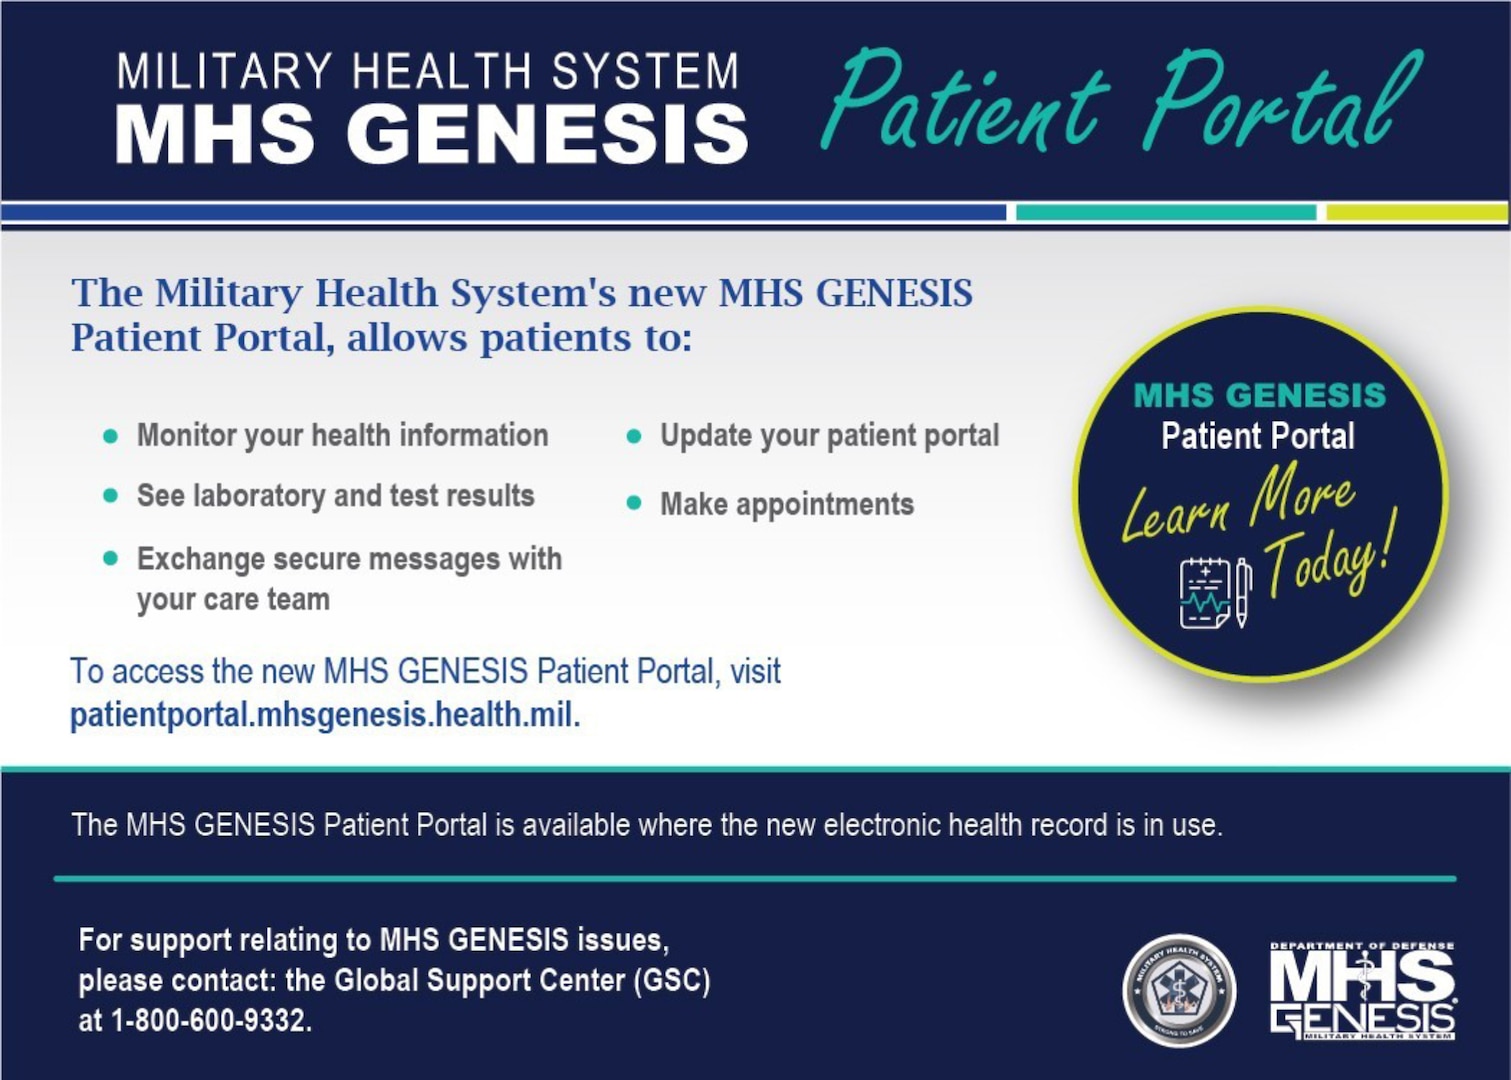 Patients can take steps now to prepare for MHS GENESIS ‘Go Live’